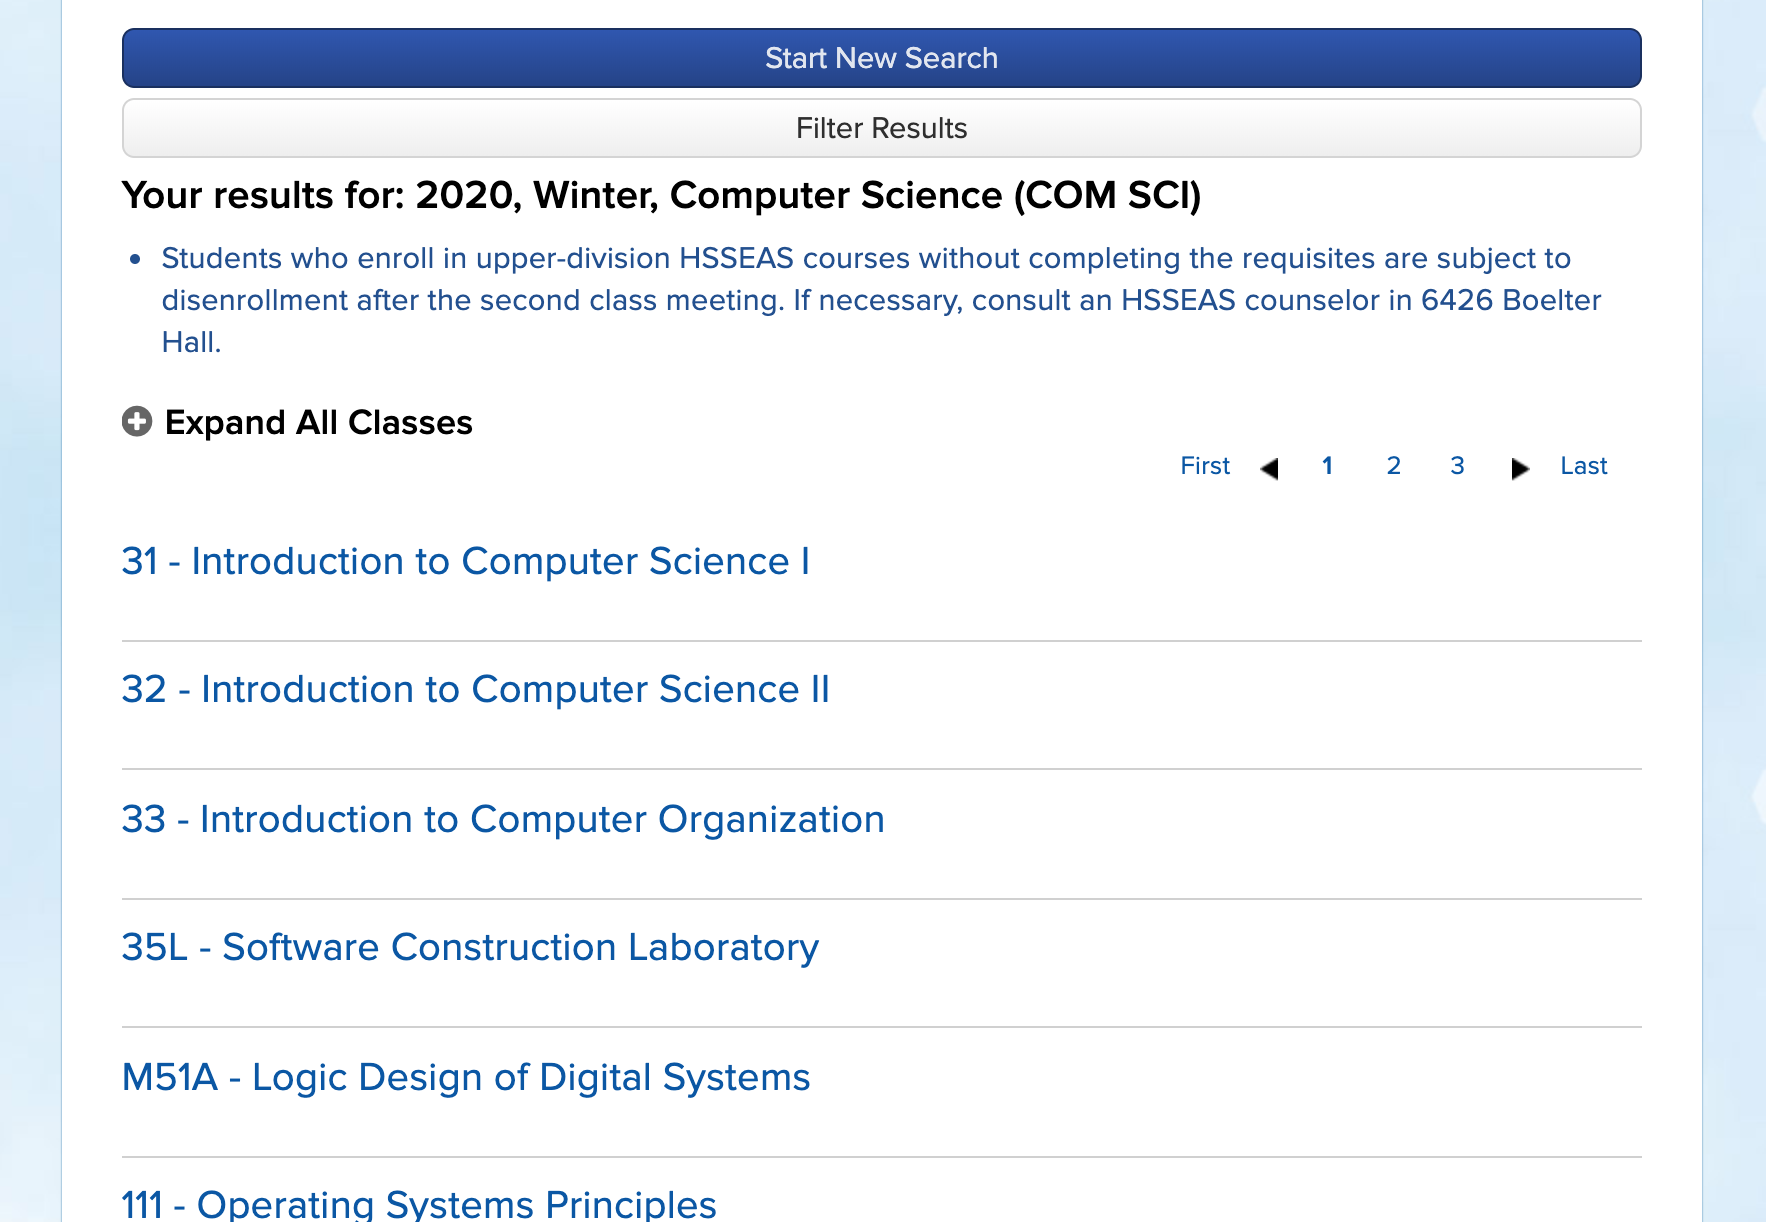 Computer Science course listings available for Winter 2020.